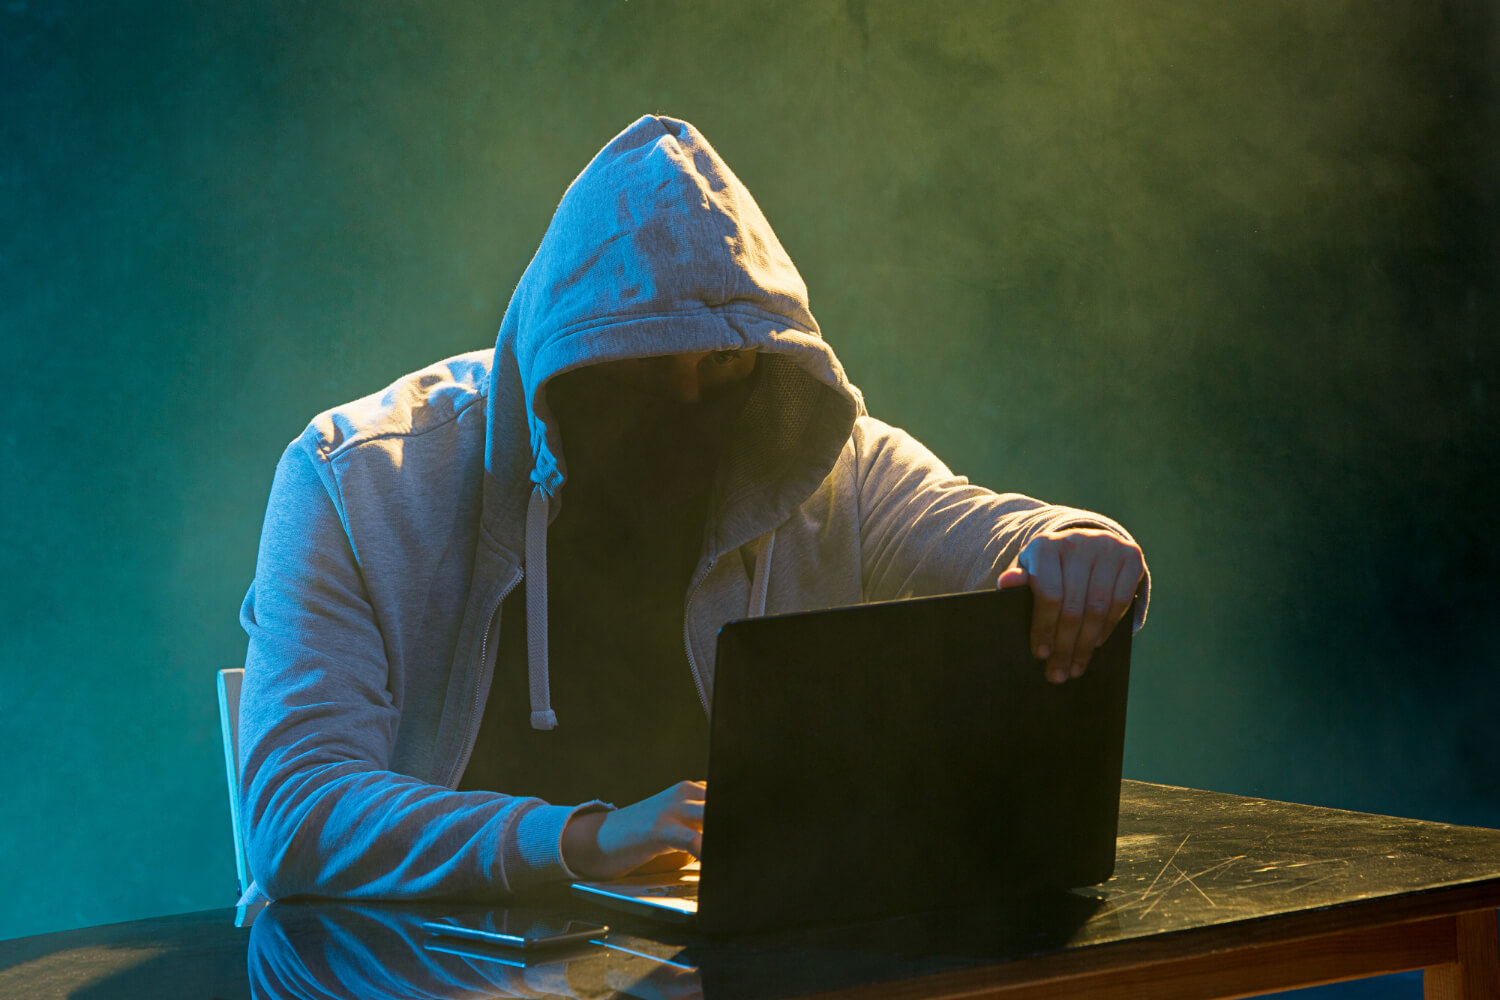 hooded-computer-hacker-stealing-information-with-laptop